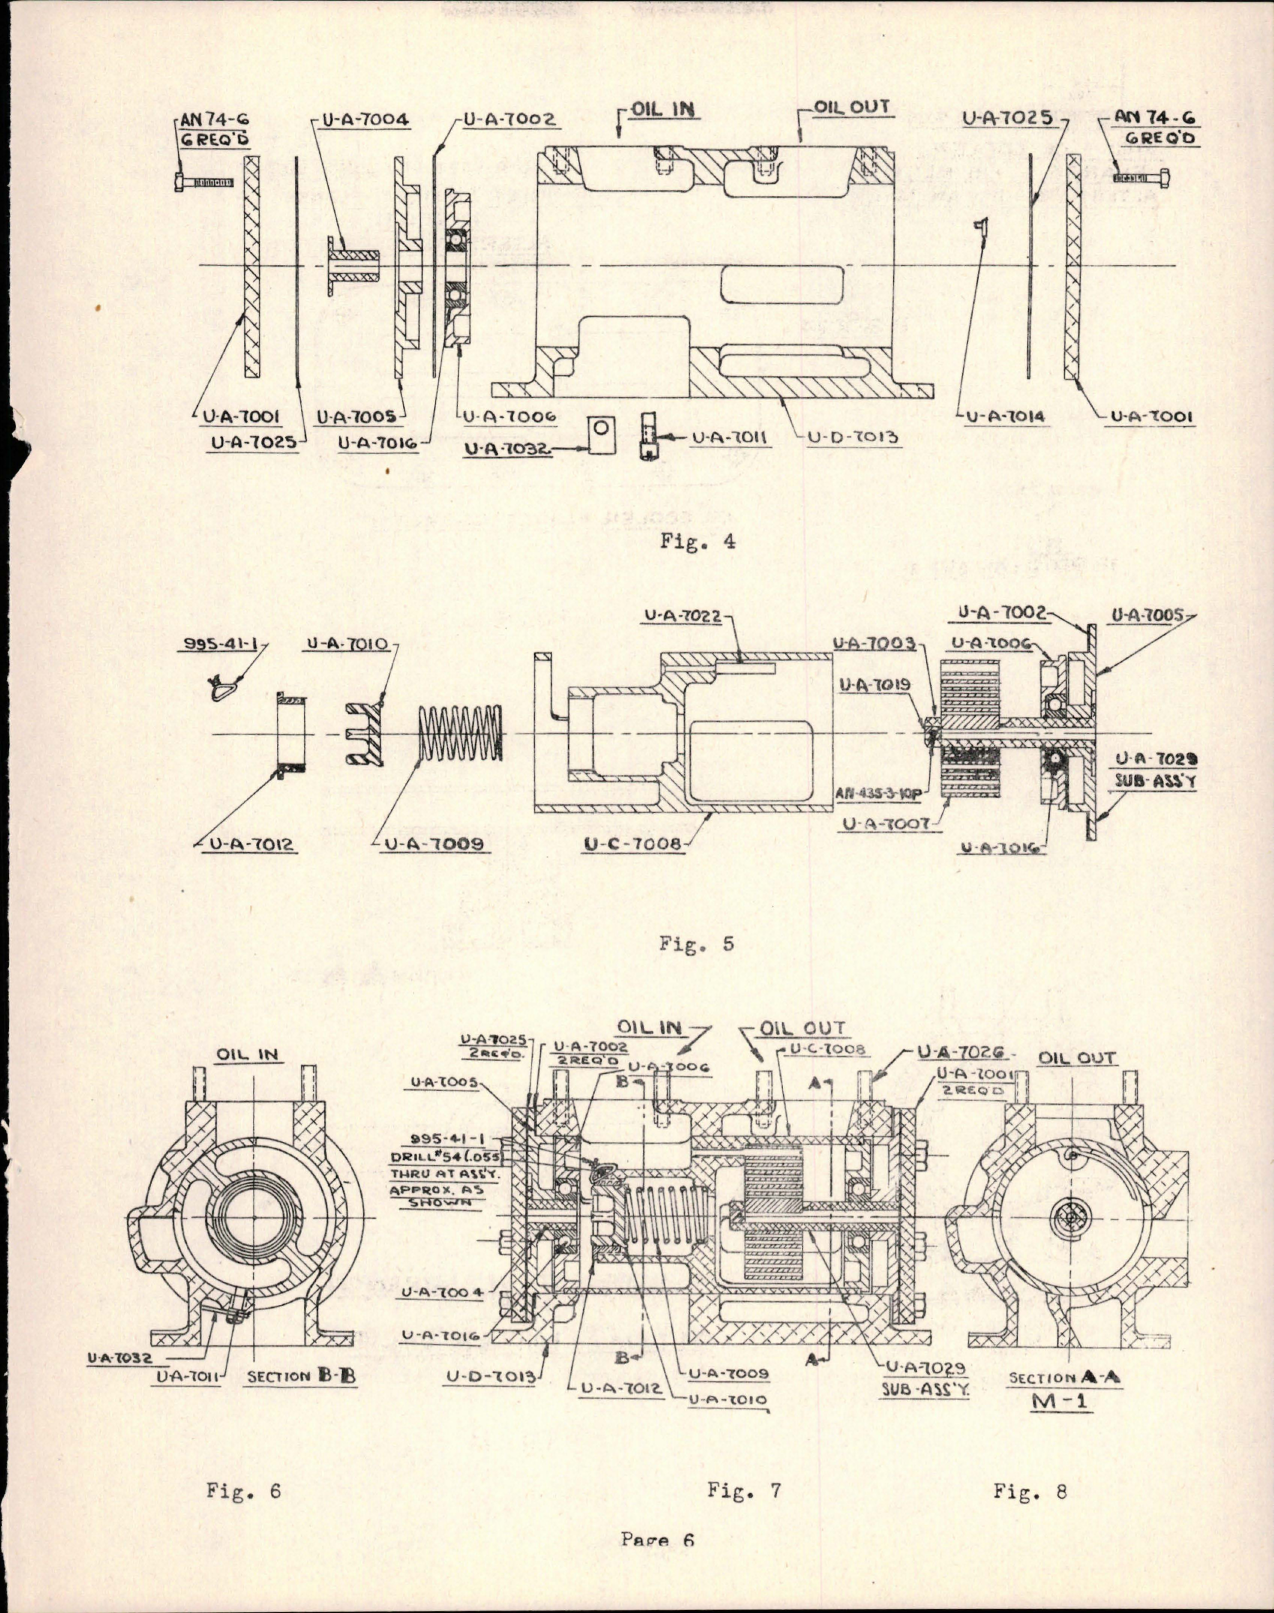 Sample page 7 from AirCorps Library document: Service Manual and Parts List for Bimetallic Oil Temperature Control Valve - Types M-1 and M-2